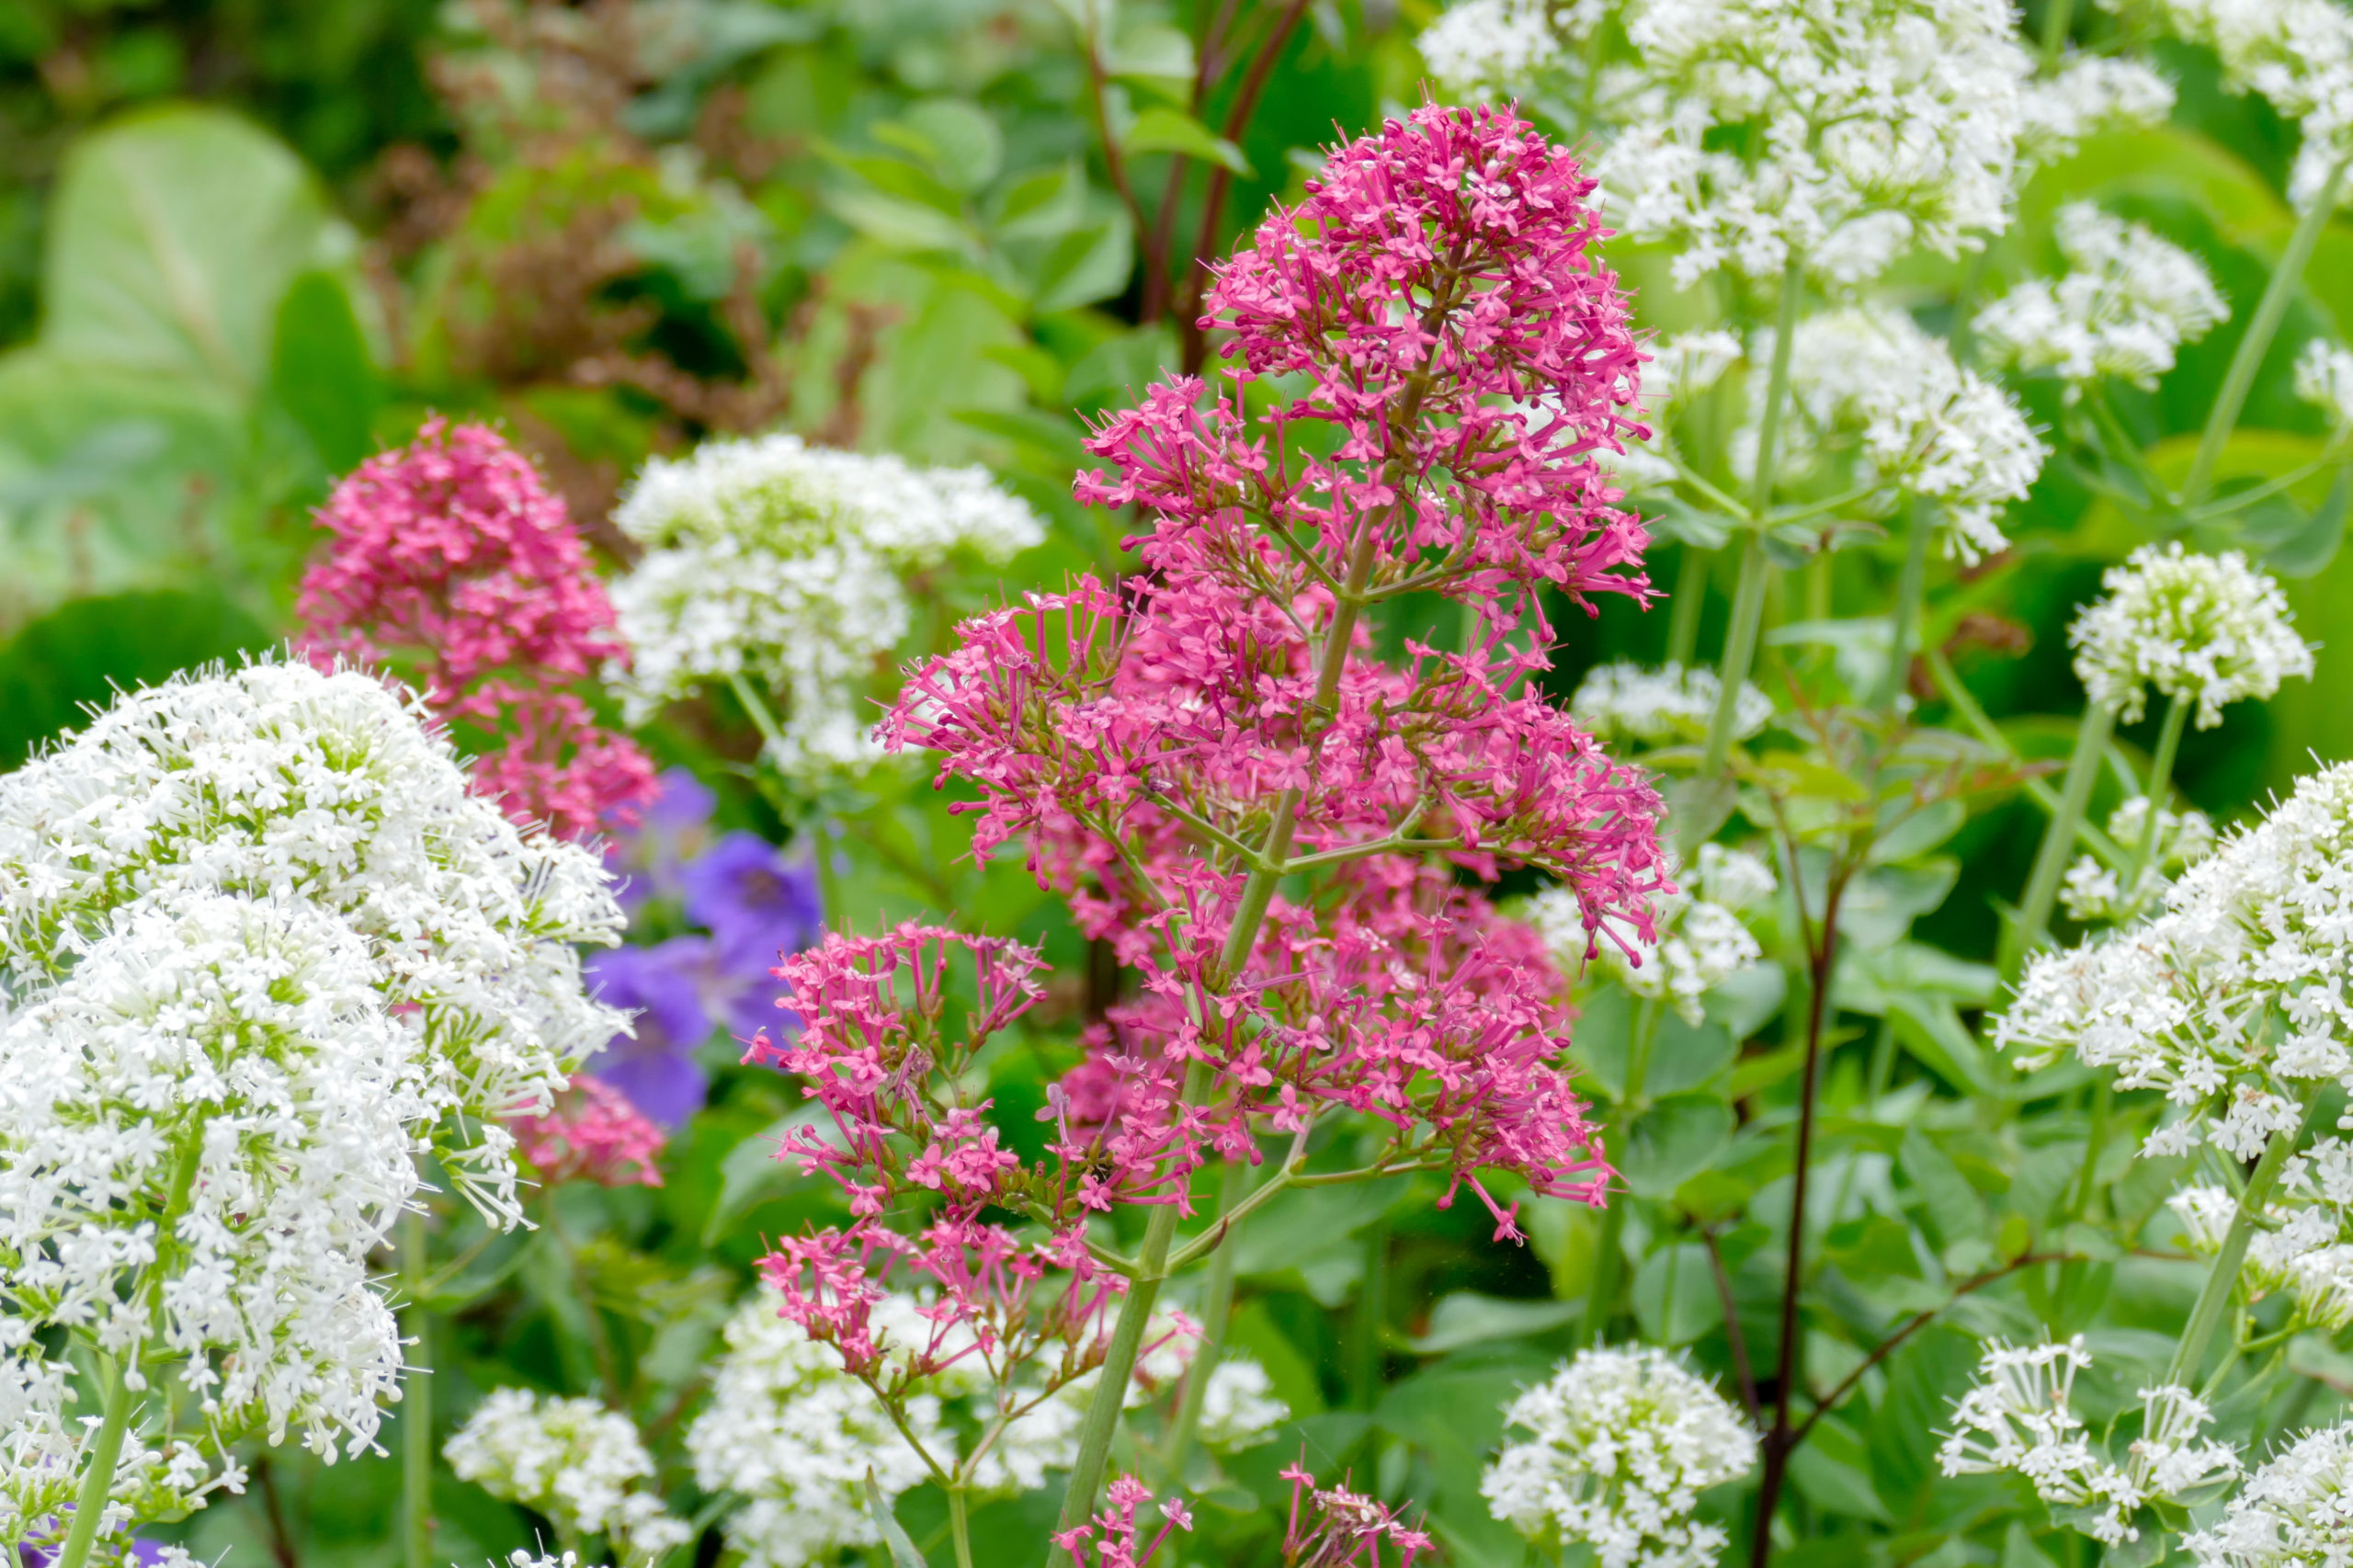 Red and White Valerian (Centranthus ruber)